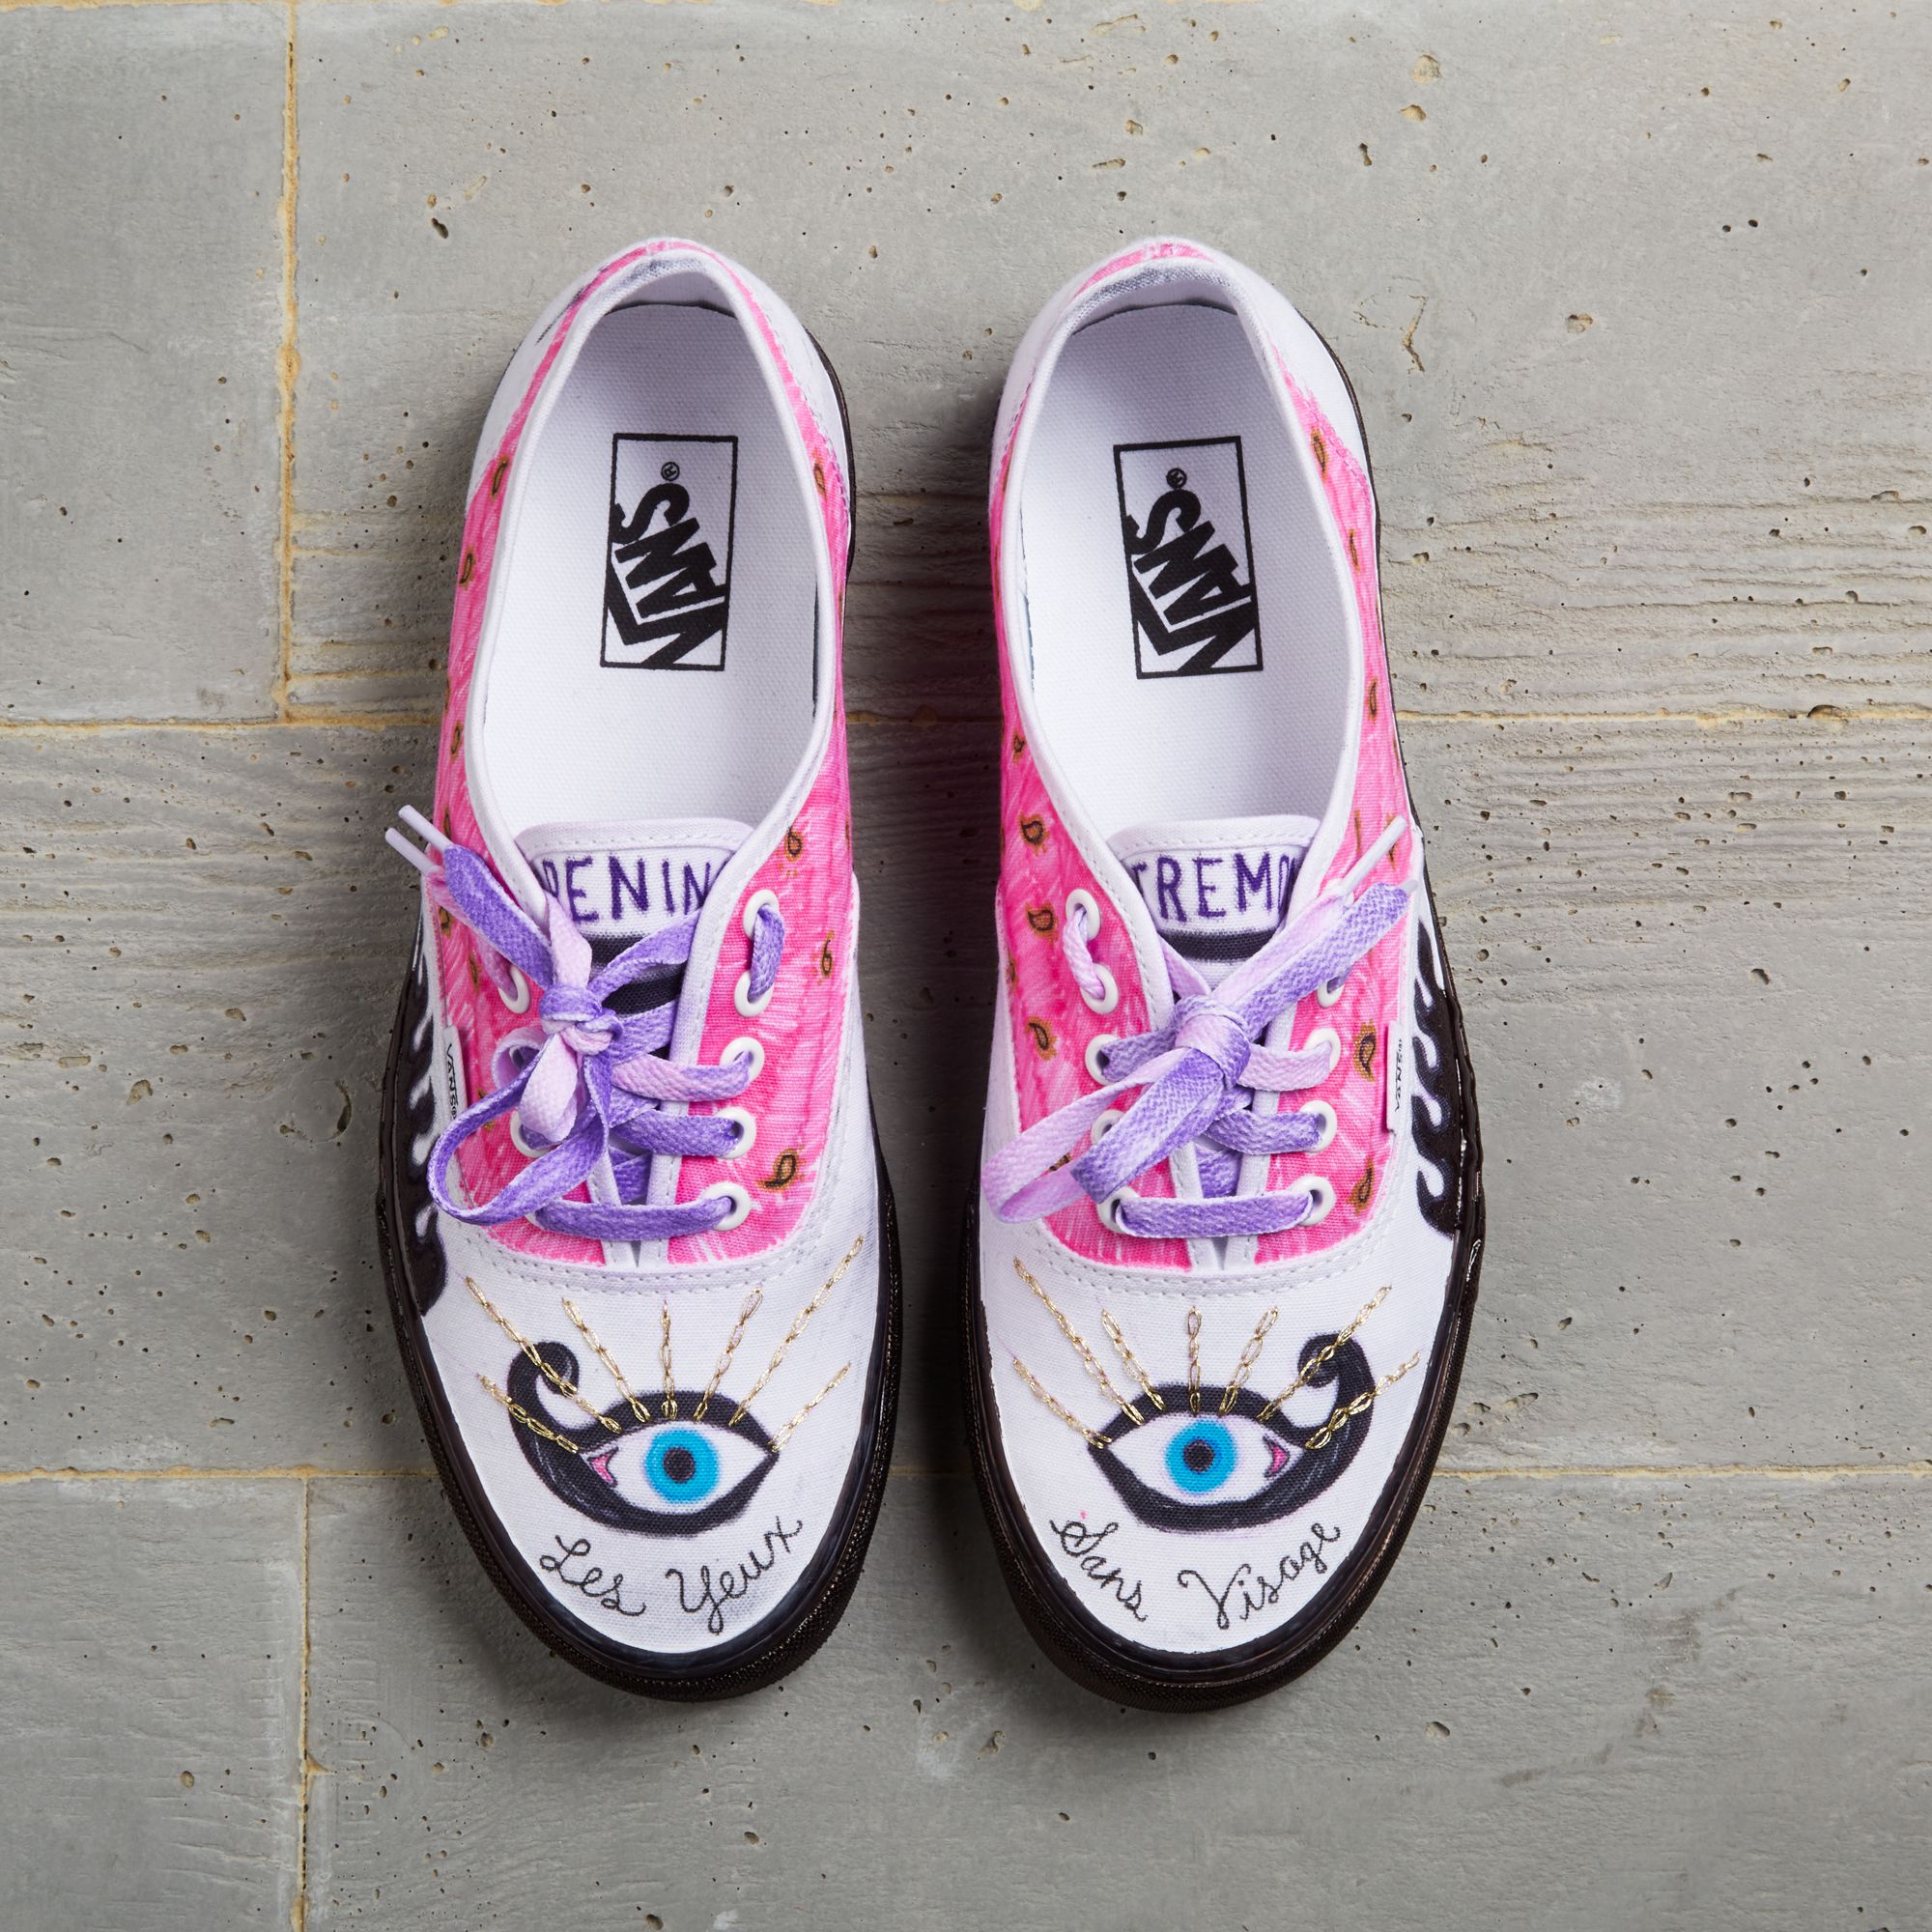 vans with designs on them